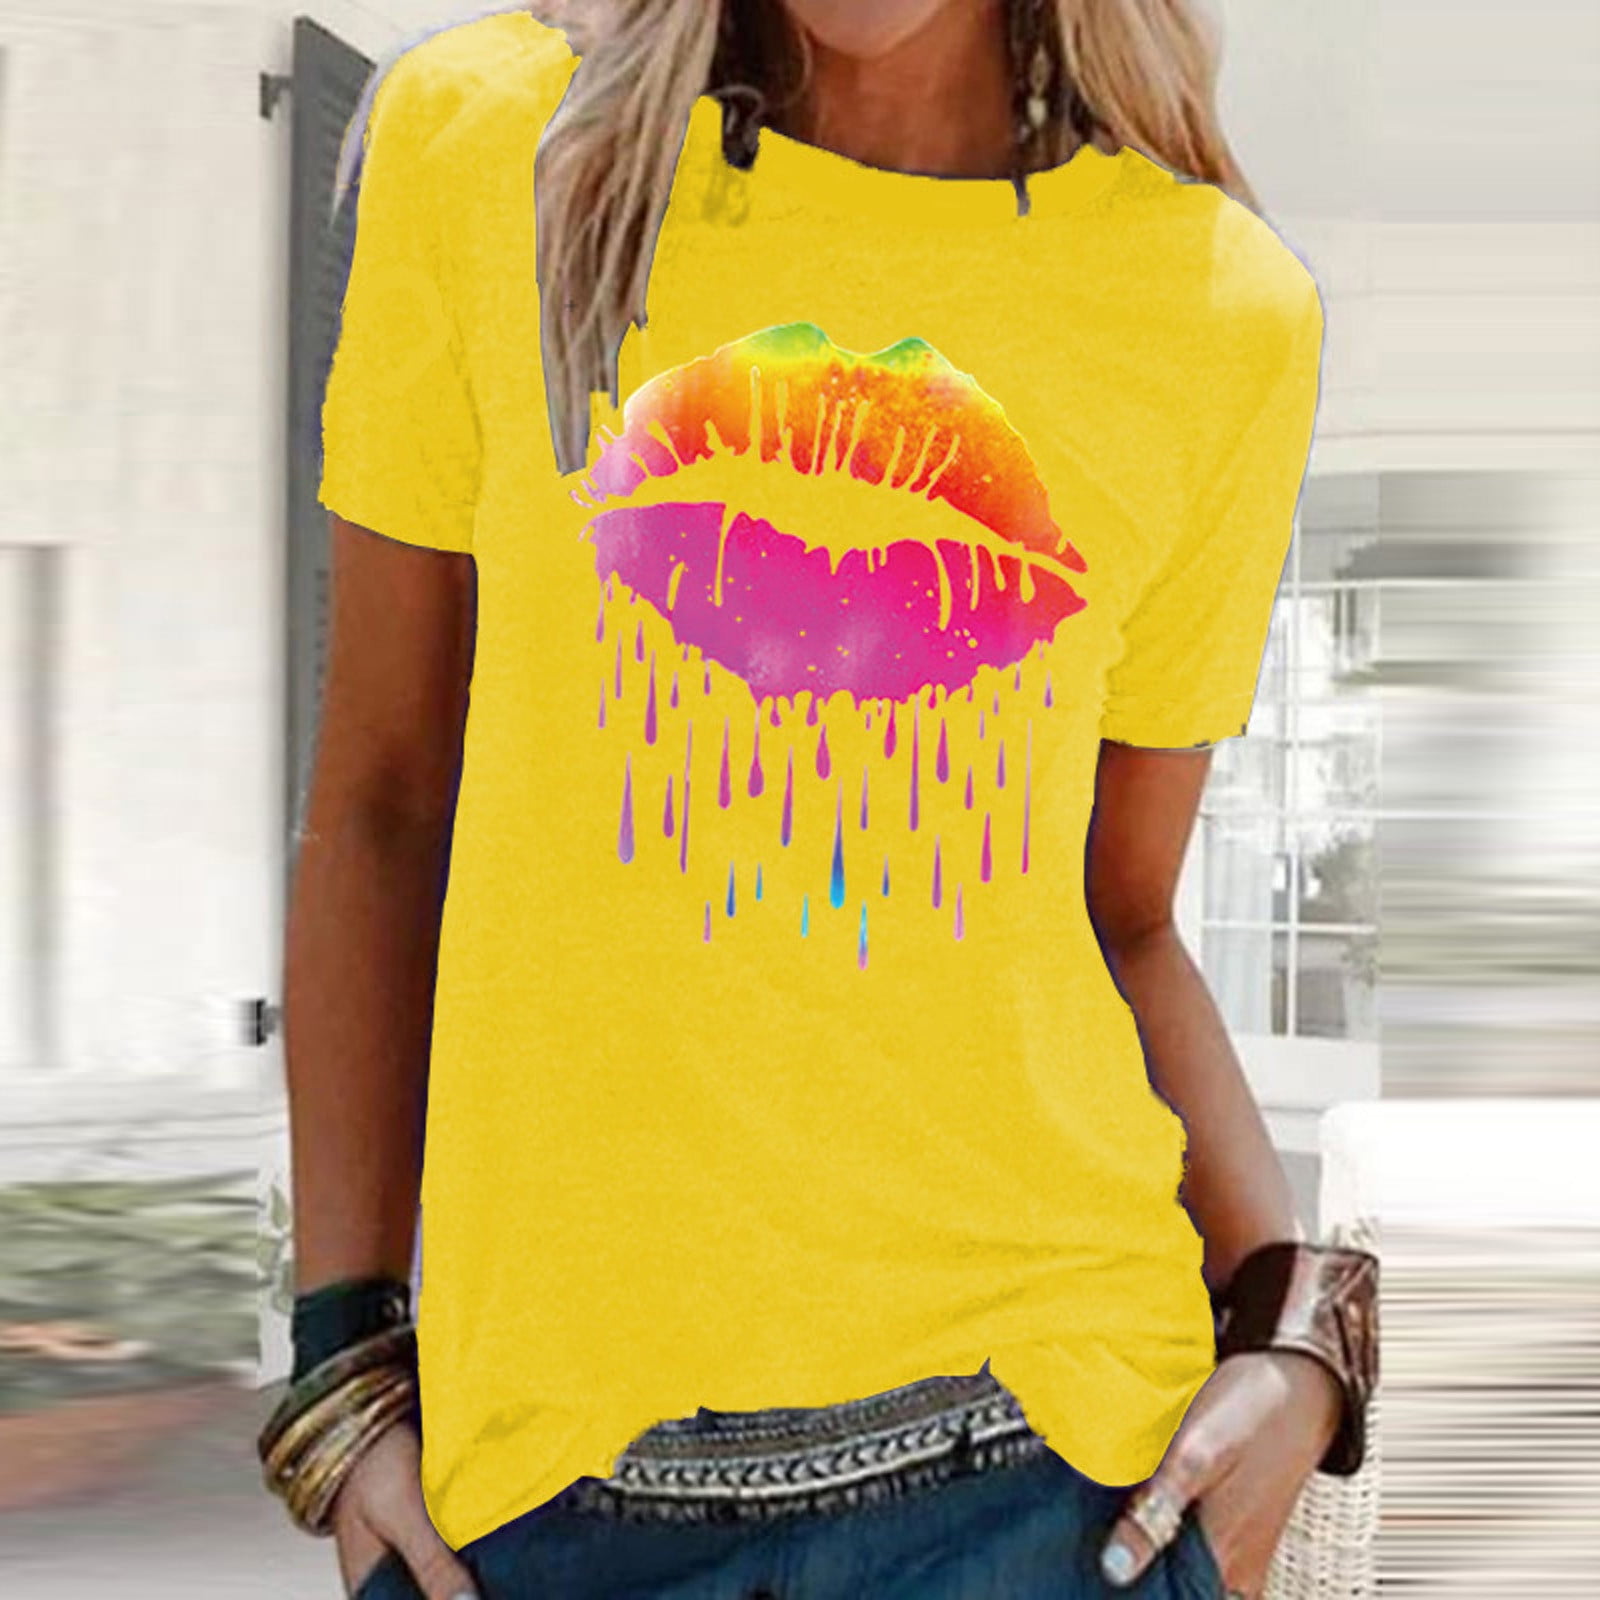 Fashion New Women's Multicolor Print Short Sleeves O Neck Casual T-Shirt Tops